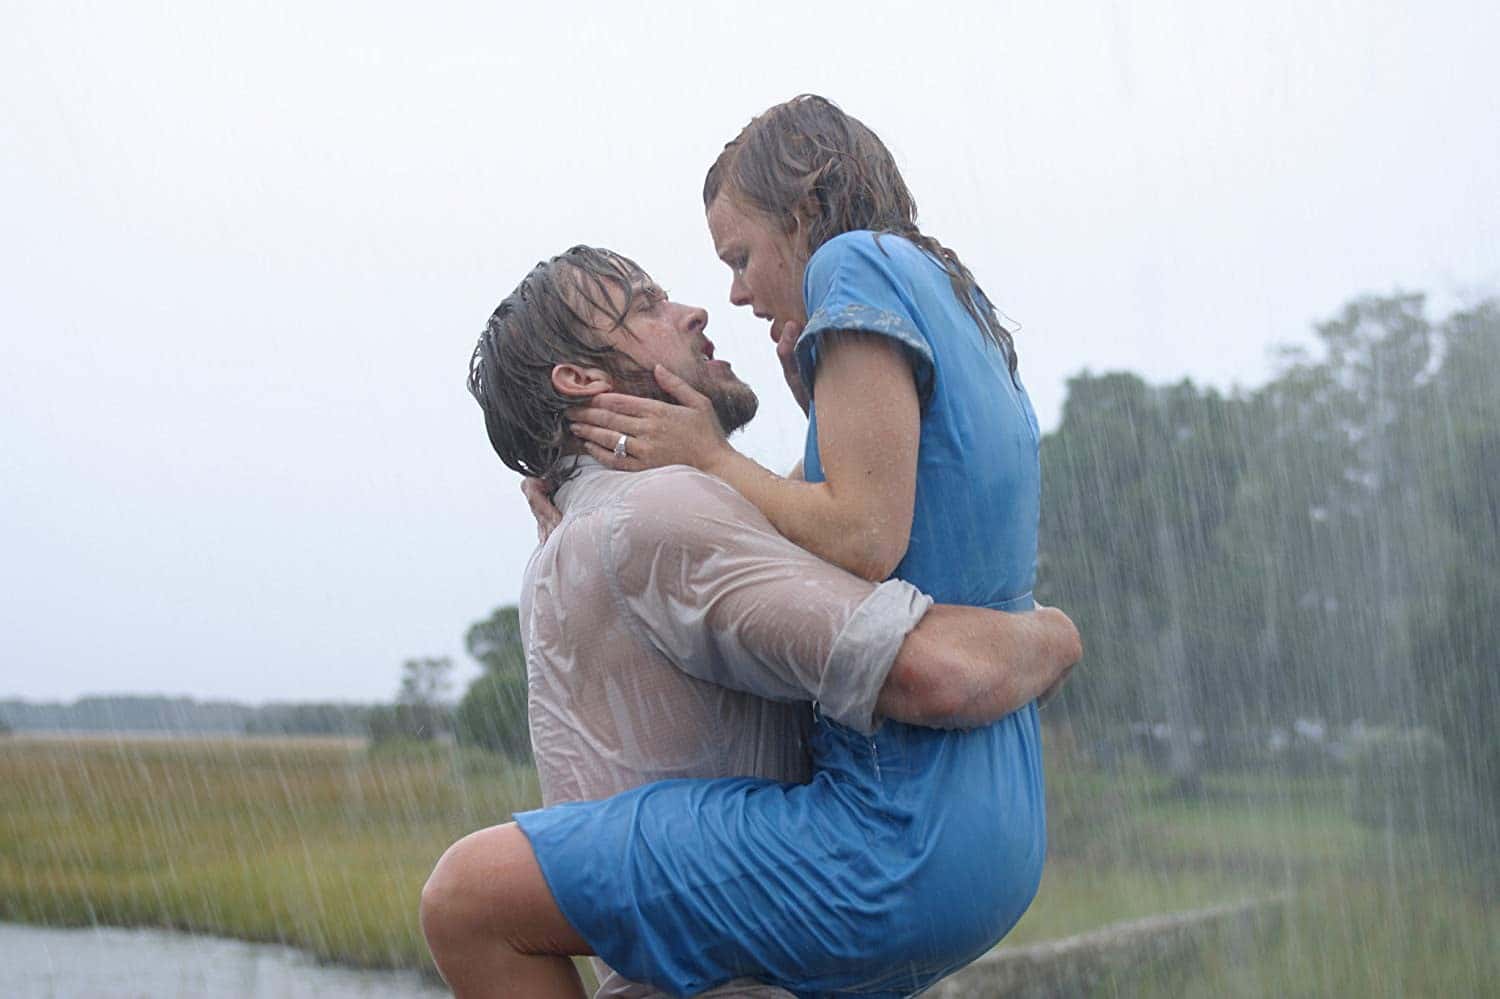 Ryan Gosling and Rachel McAdams in The Notebook hold each other passionately in the rain